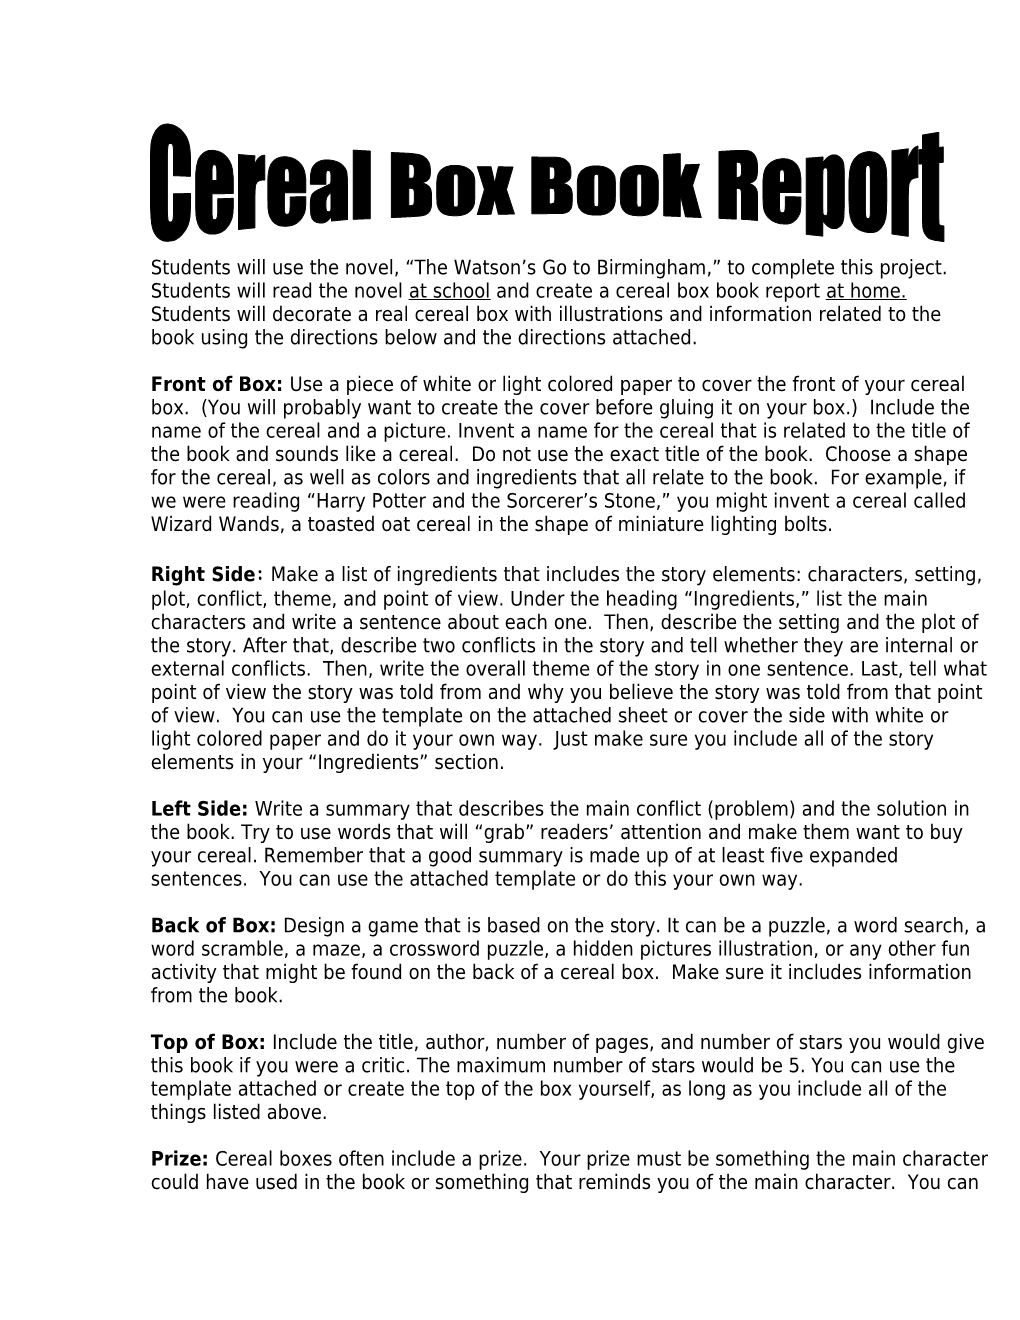 Front of Box:Use a Piece of White Or Light Colored Paper to Cover the Front of Your Cereal